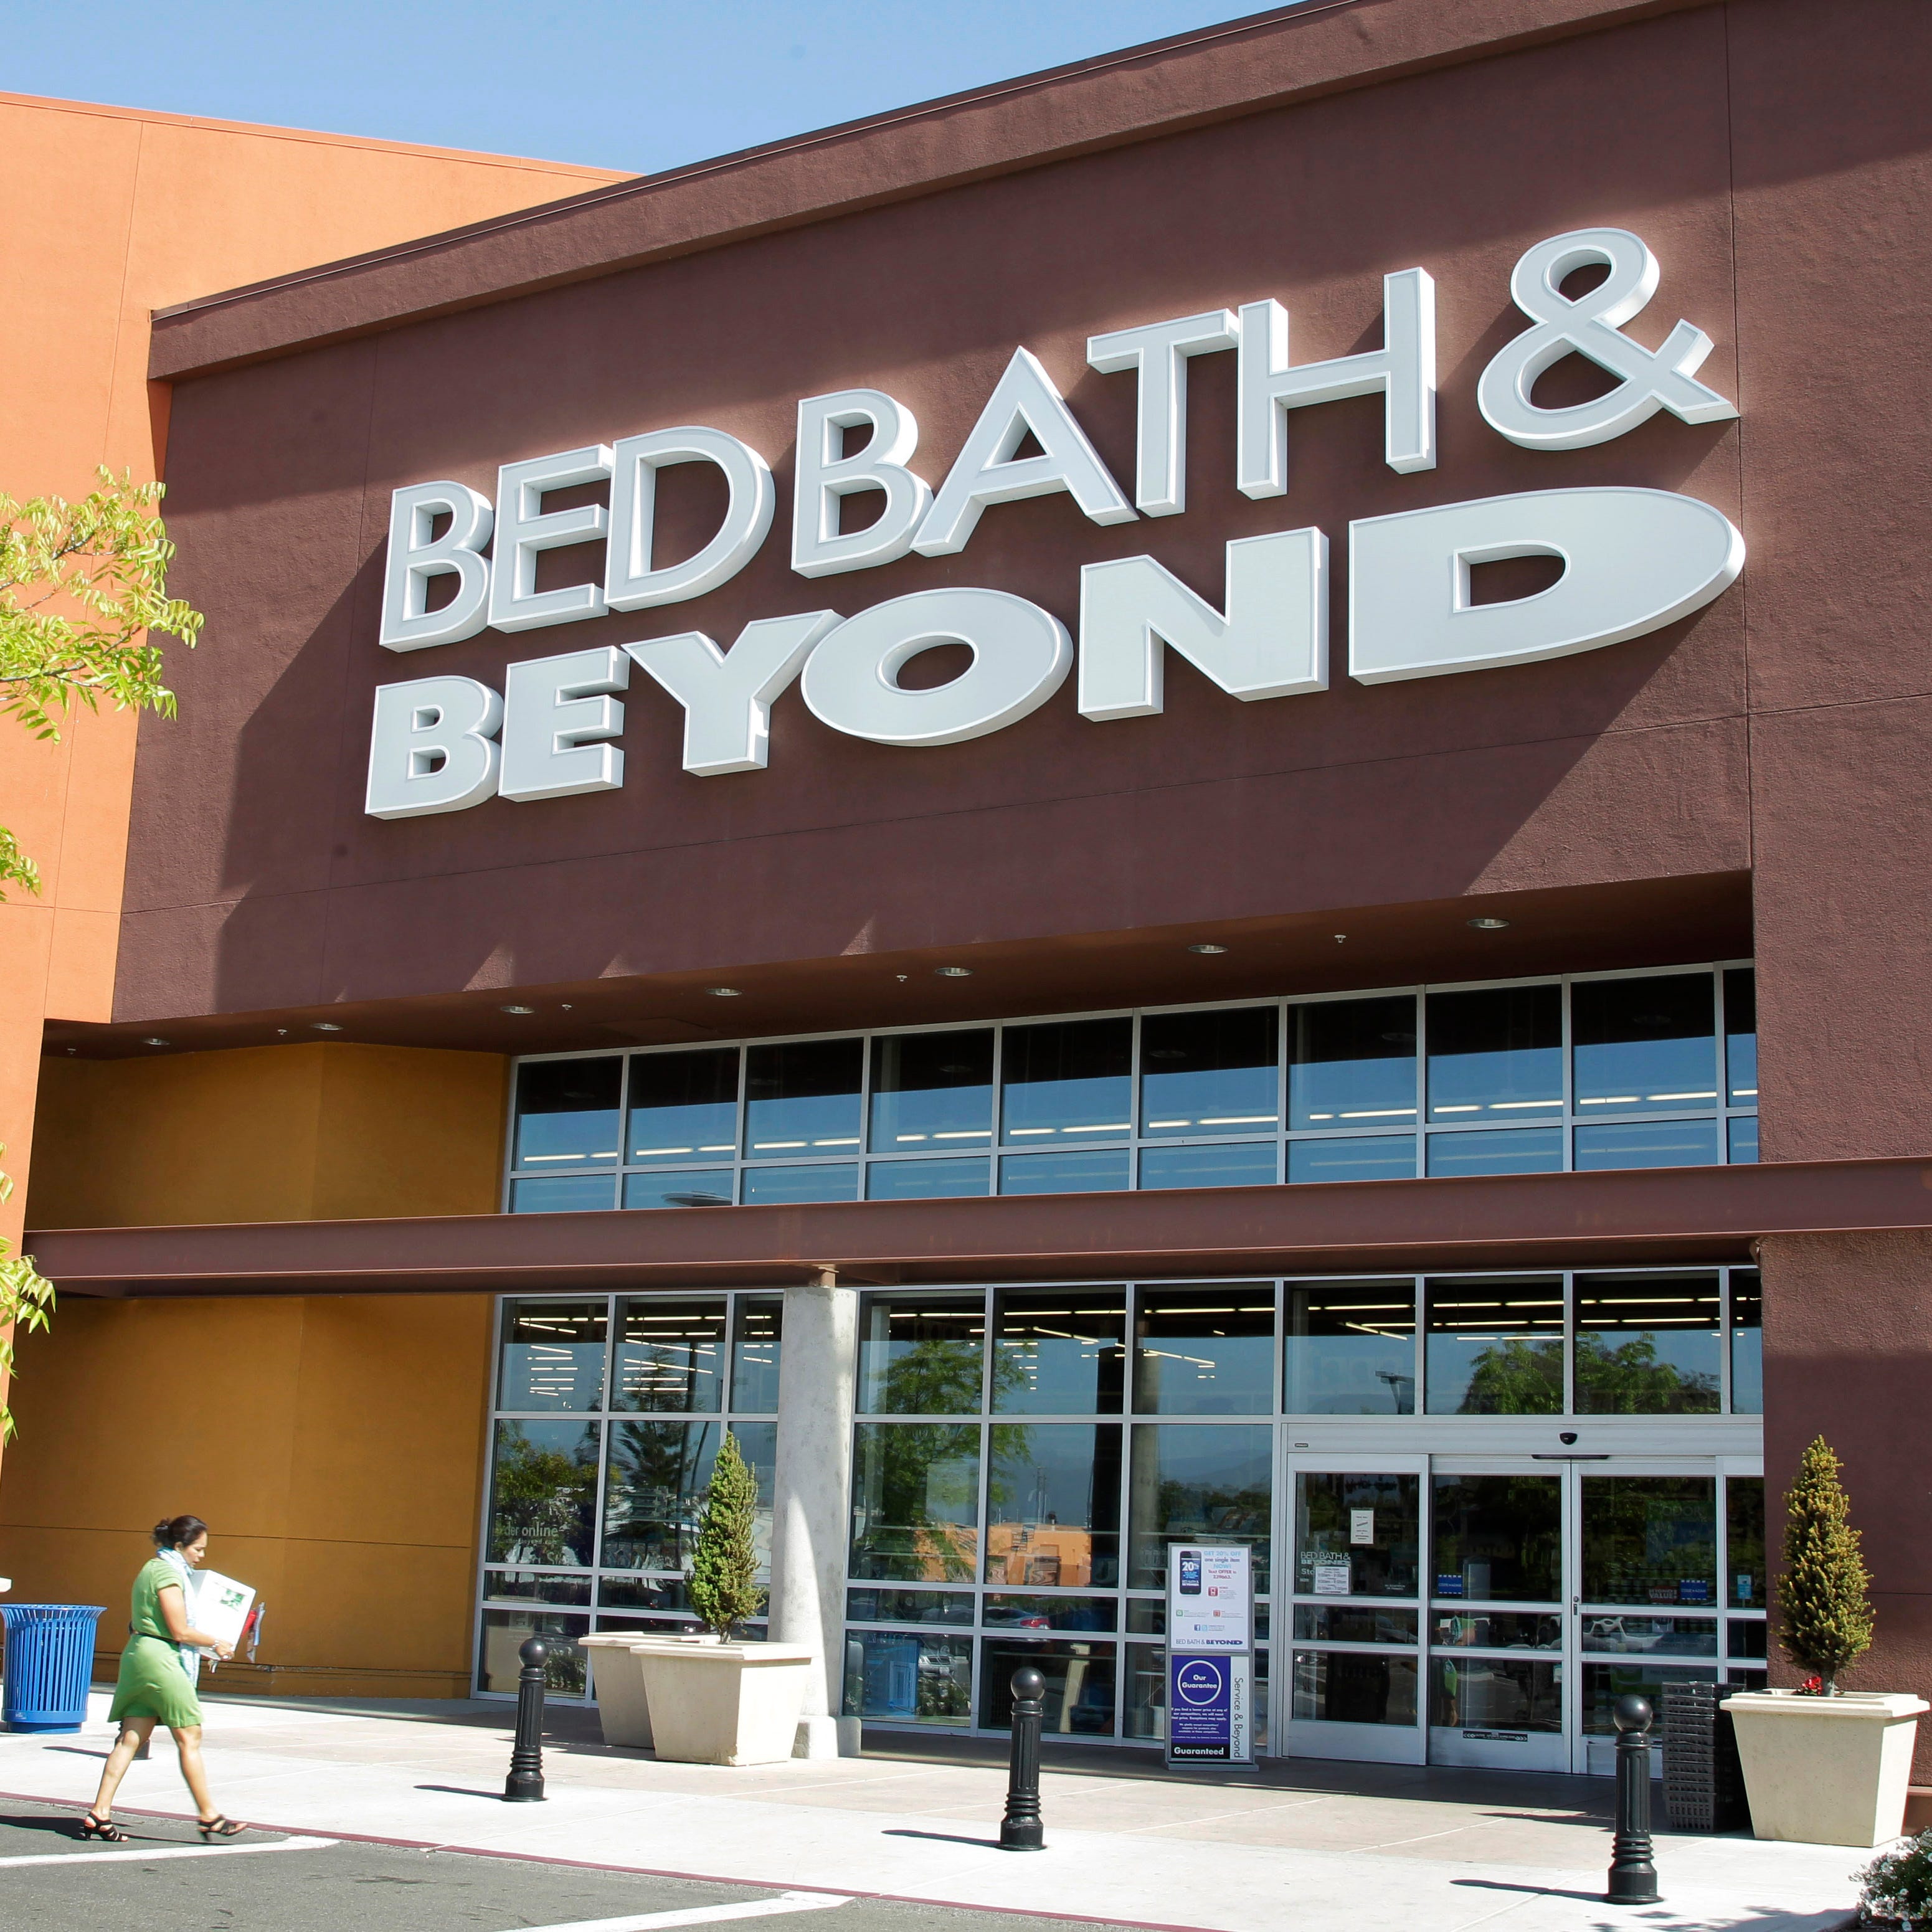 A Bed Bath & Beyond customer enters a store in Mountain View, Calif., Wednesday, May 9, 2012.